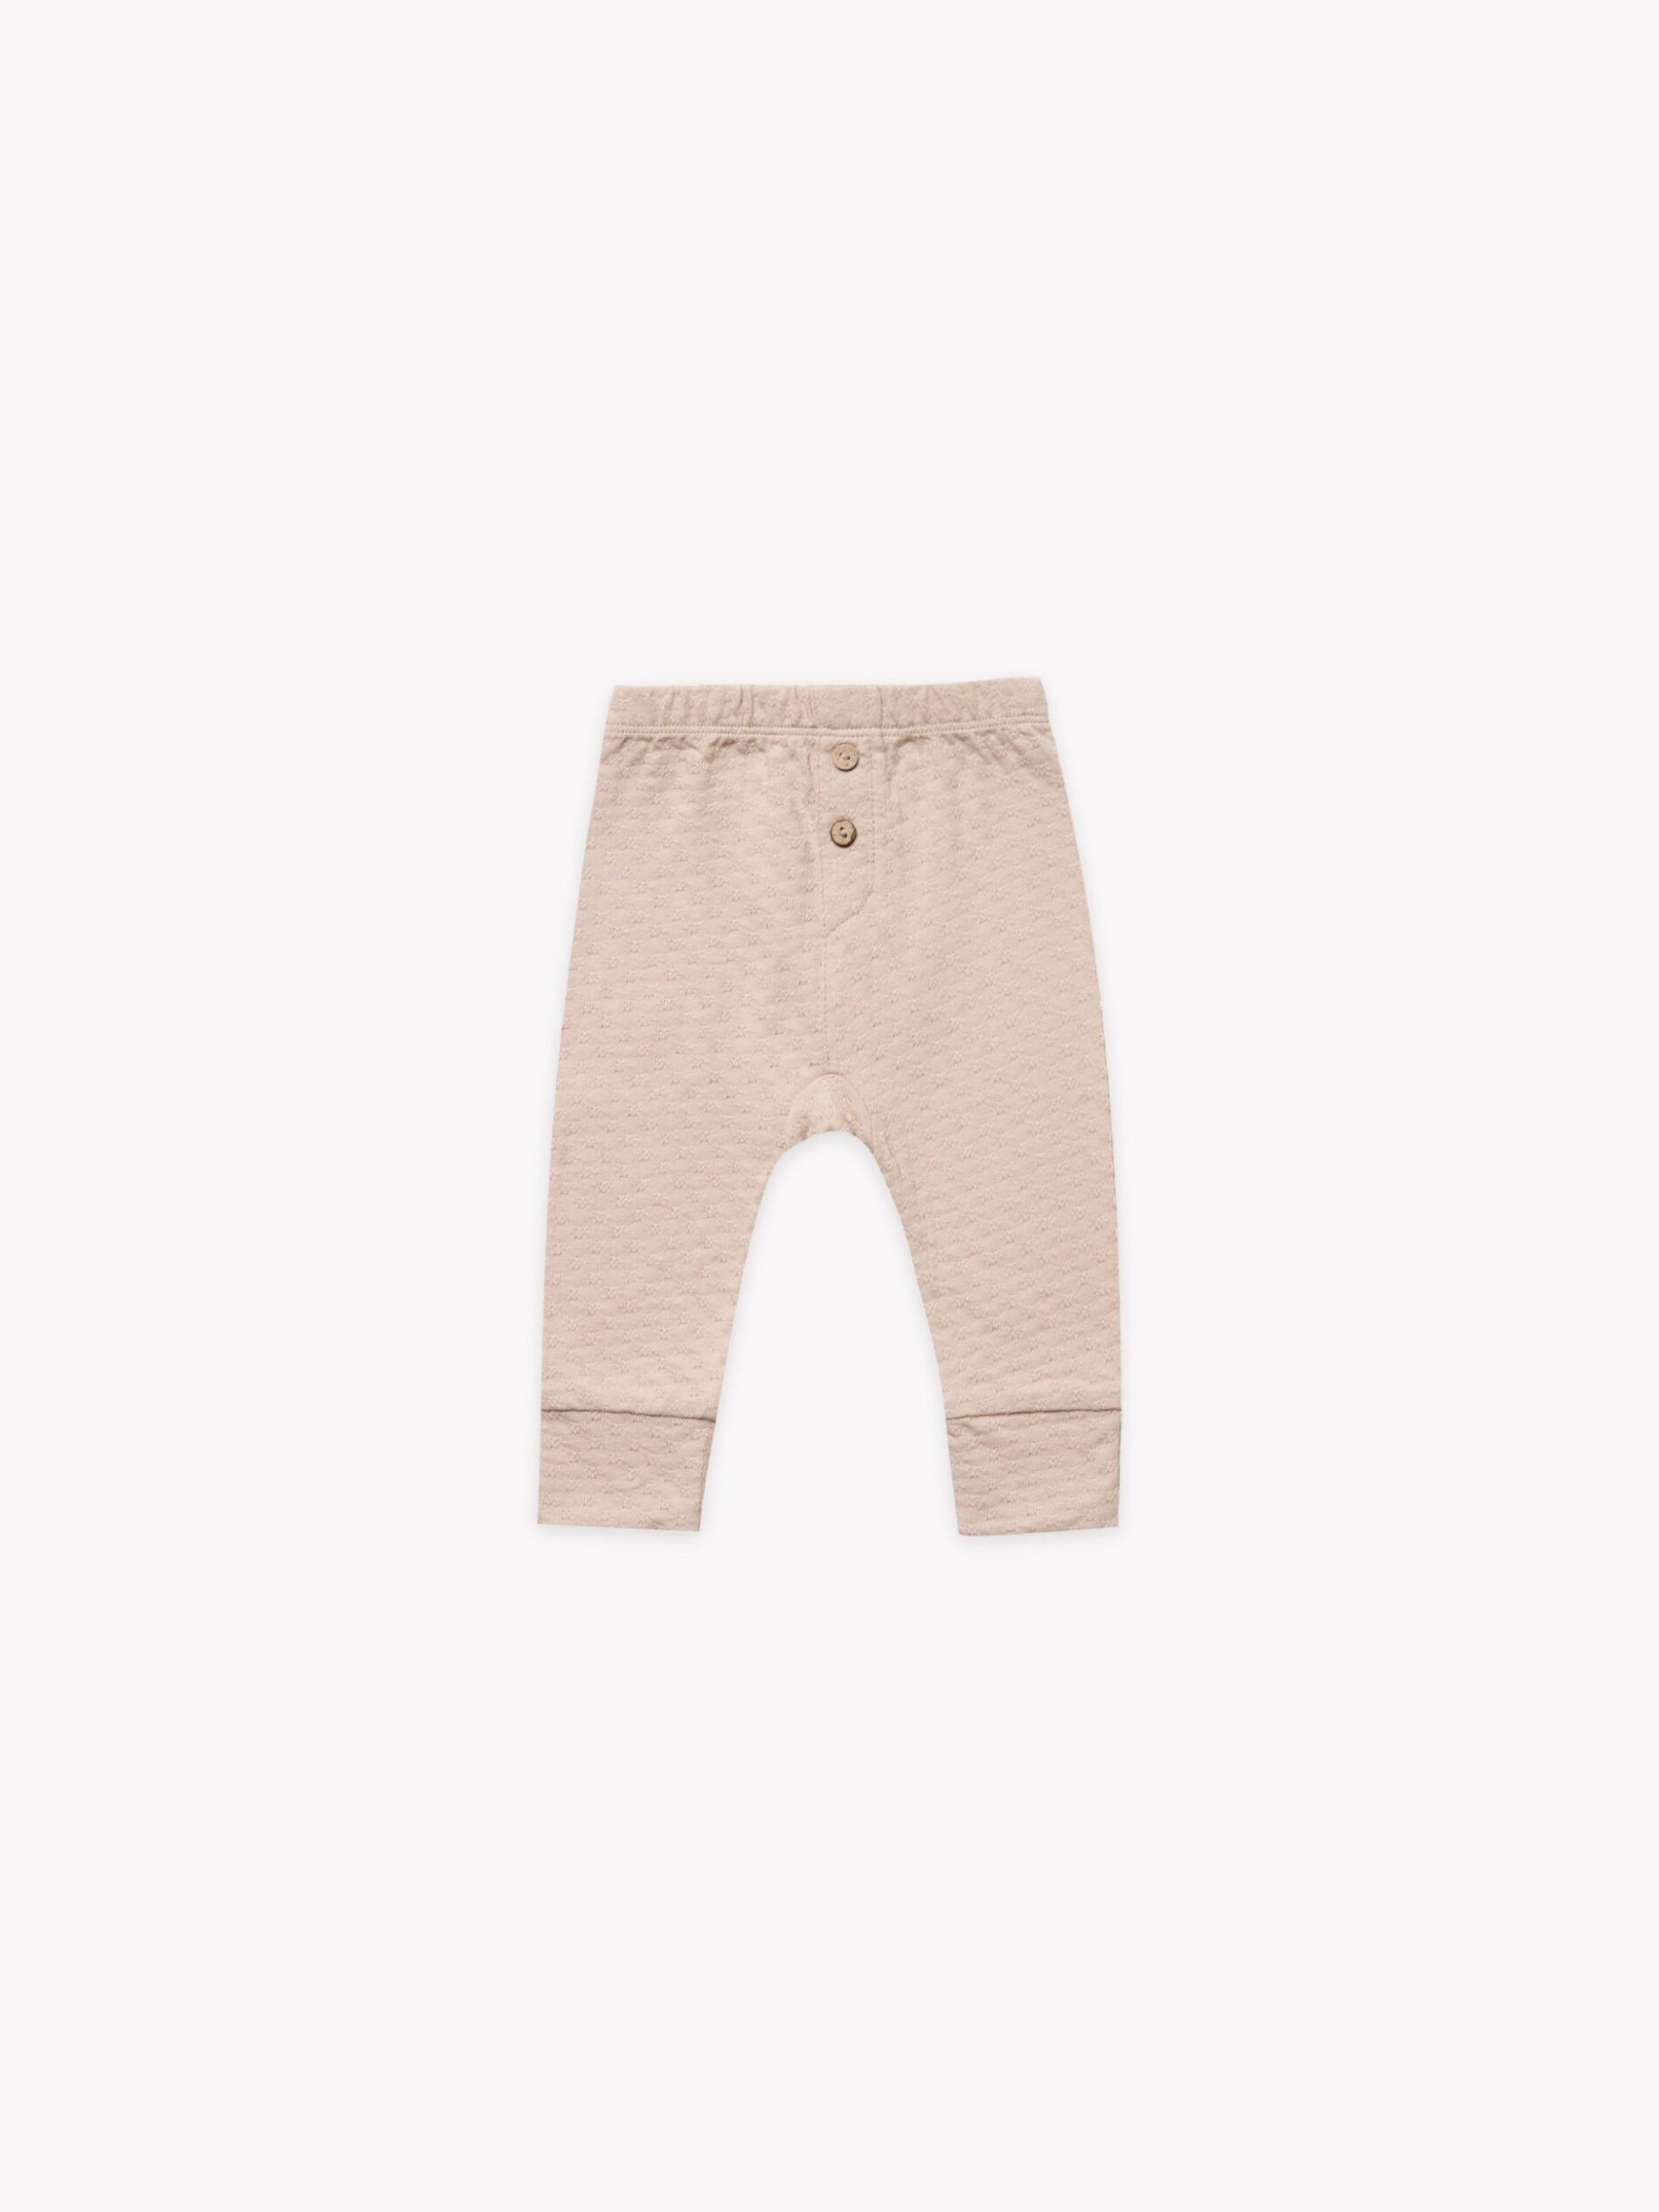 Pointelle baby pants - Riverstone